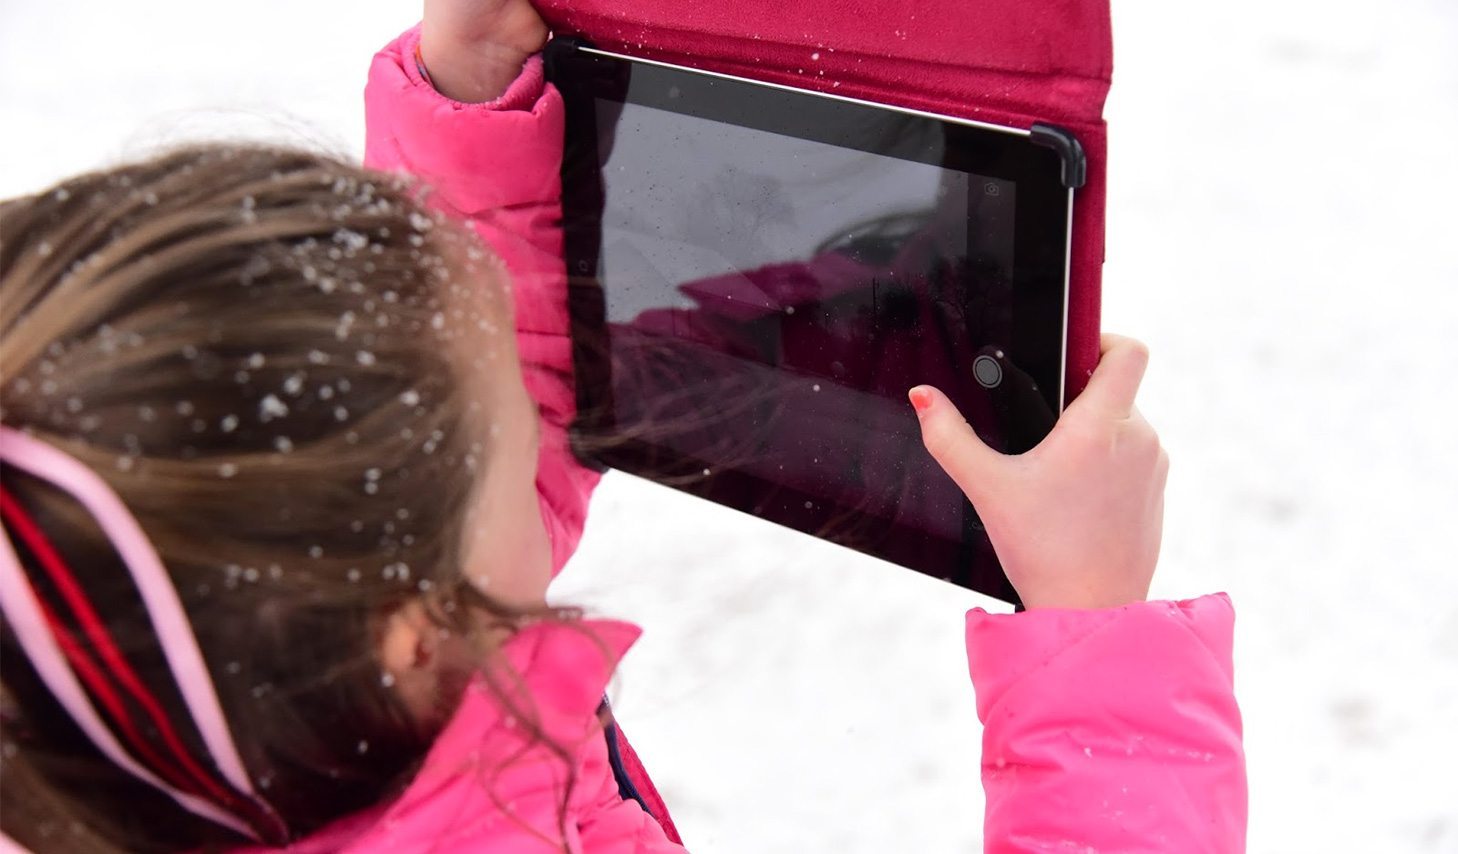 Taking a photo in the snow with an iPad